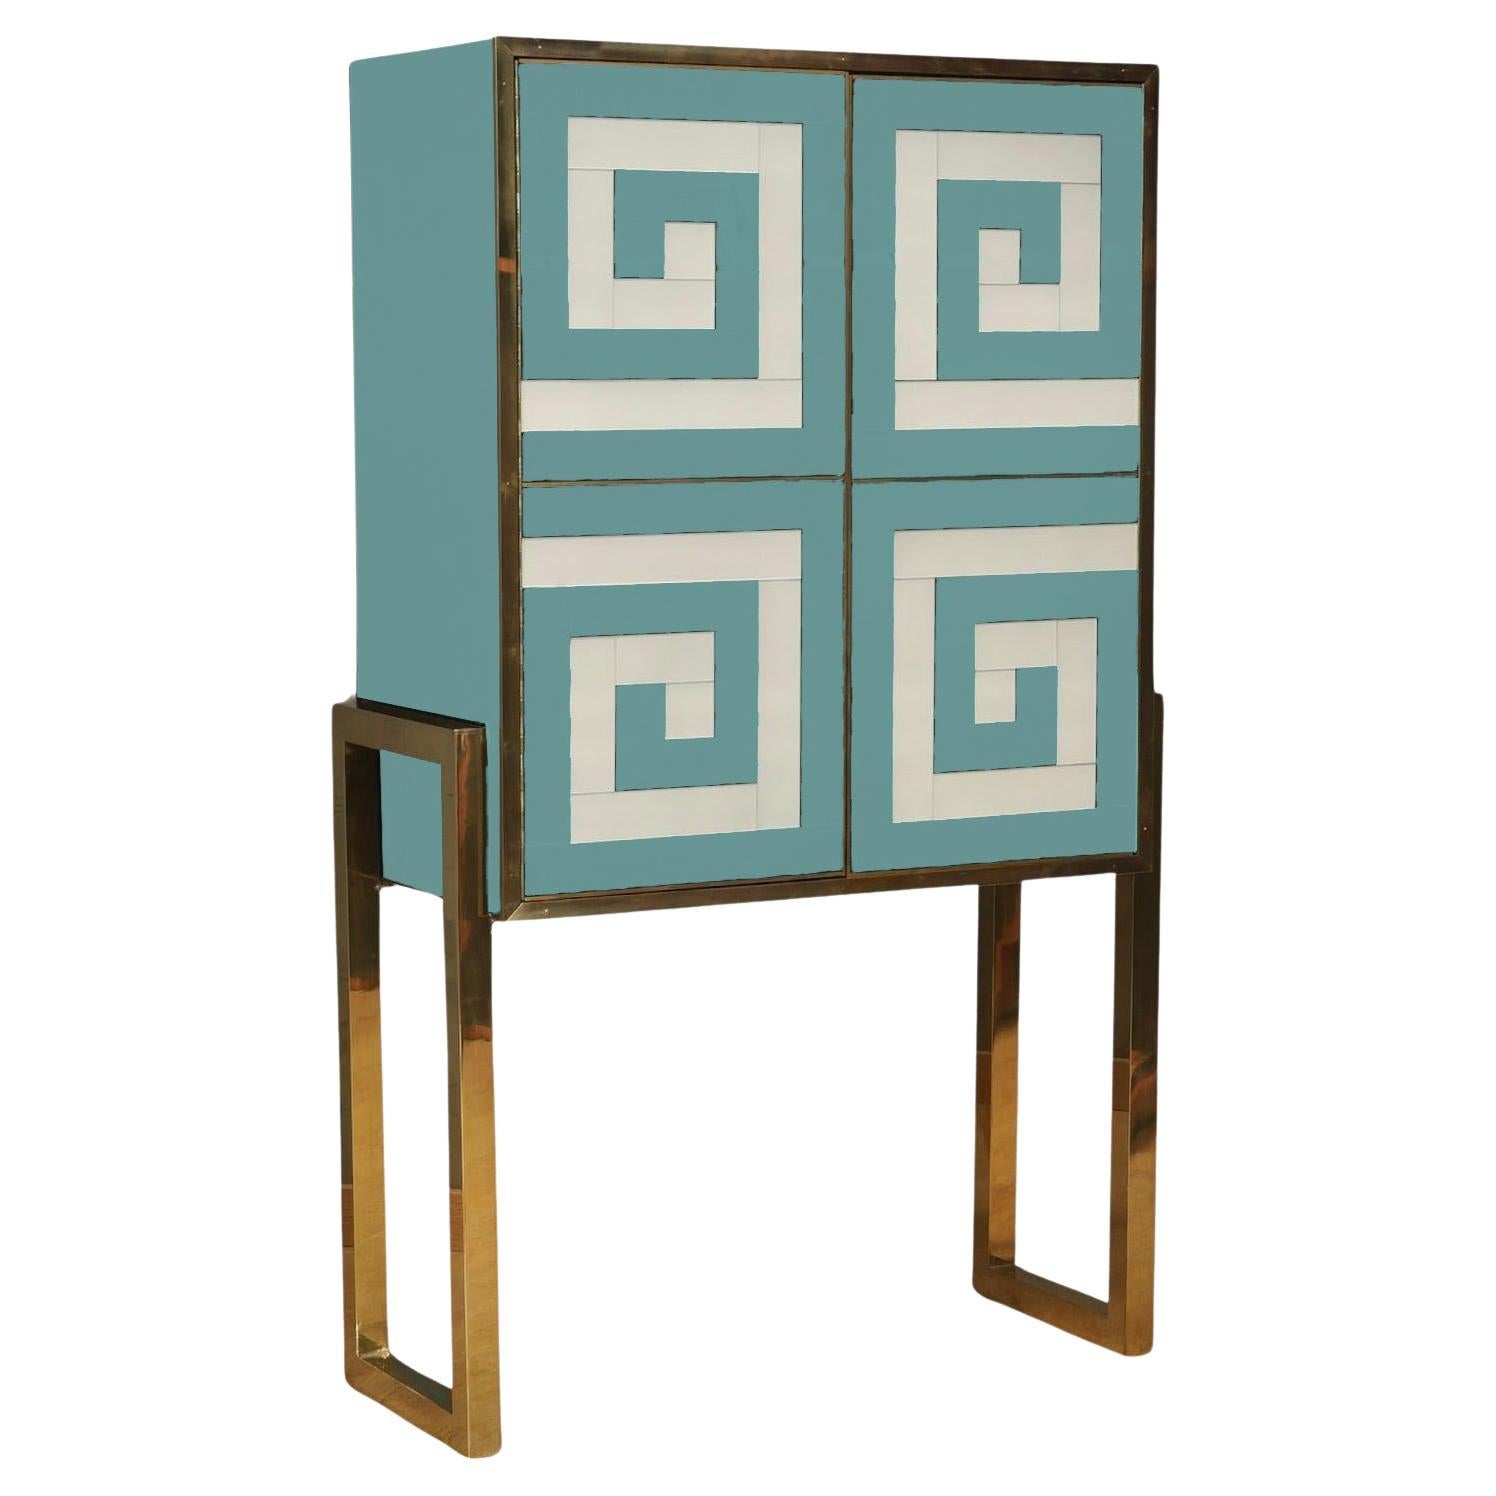 Spectacular Light Blue & White Bar Cabinet Made in Italy Available